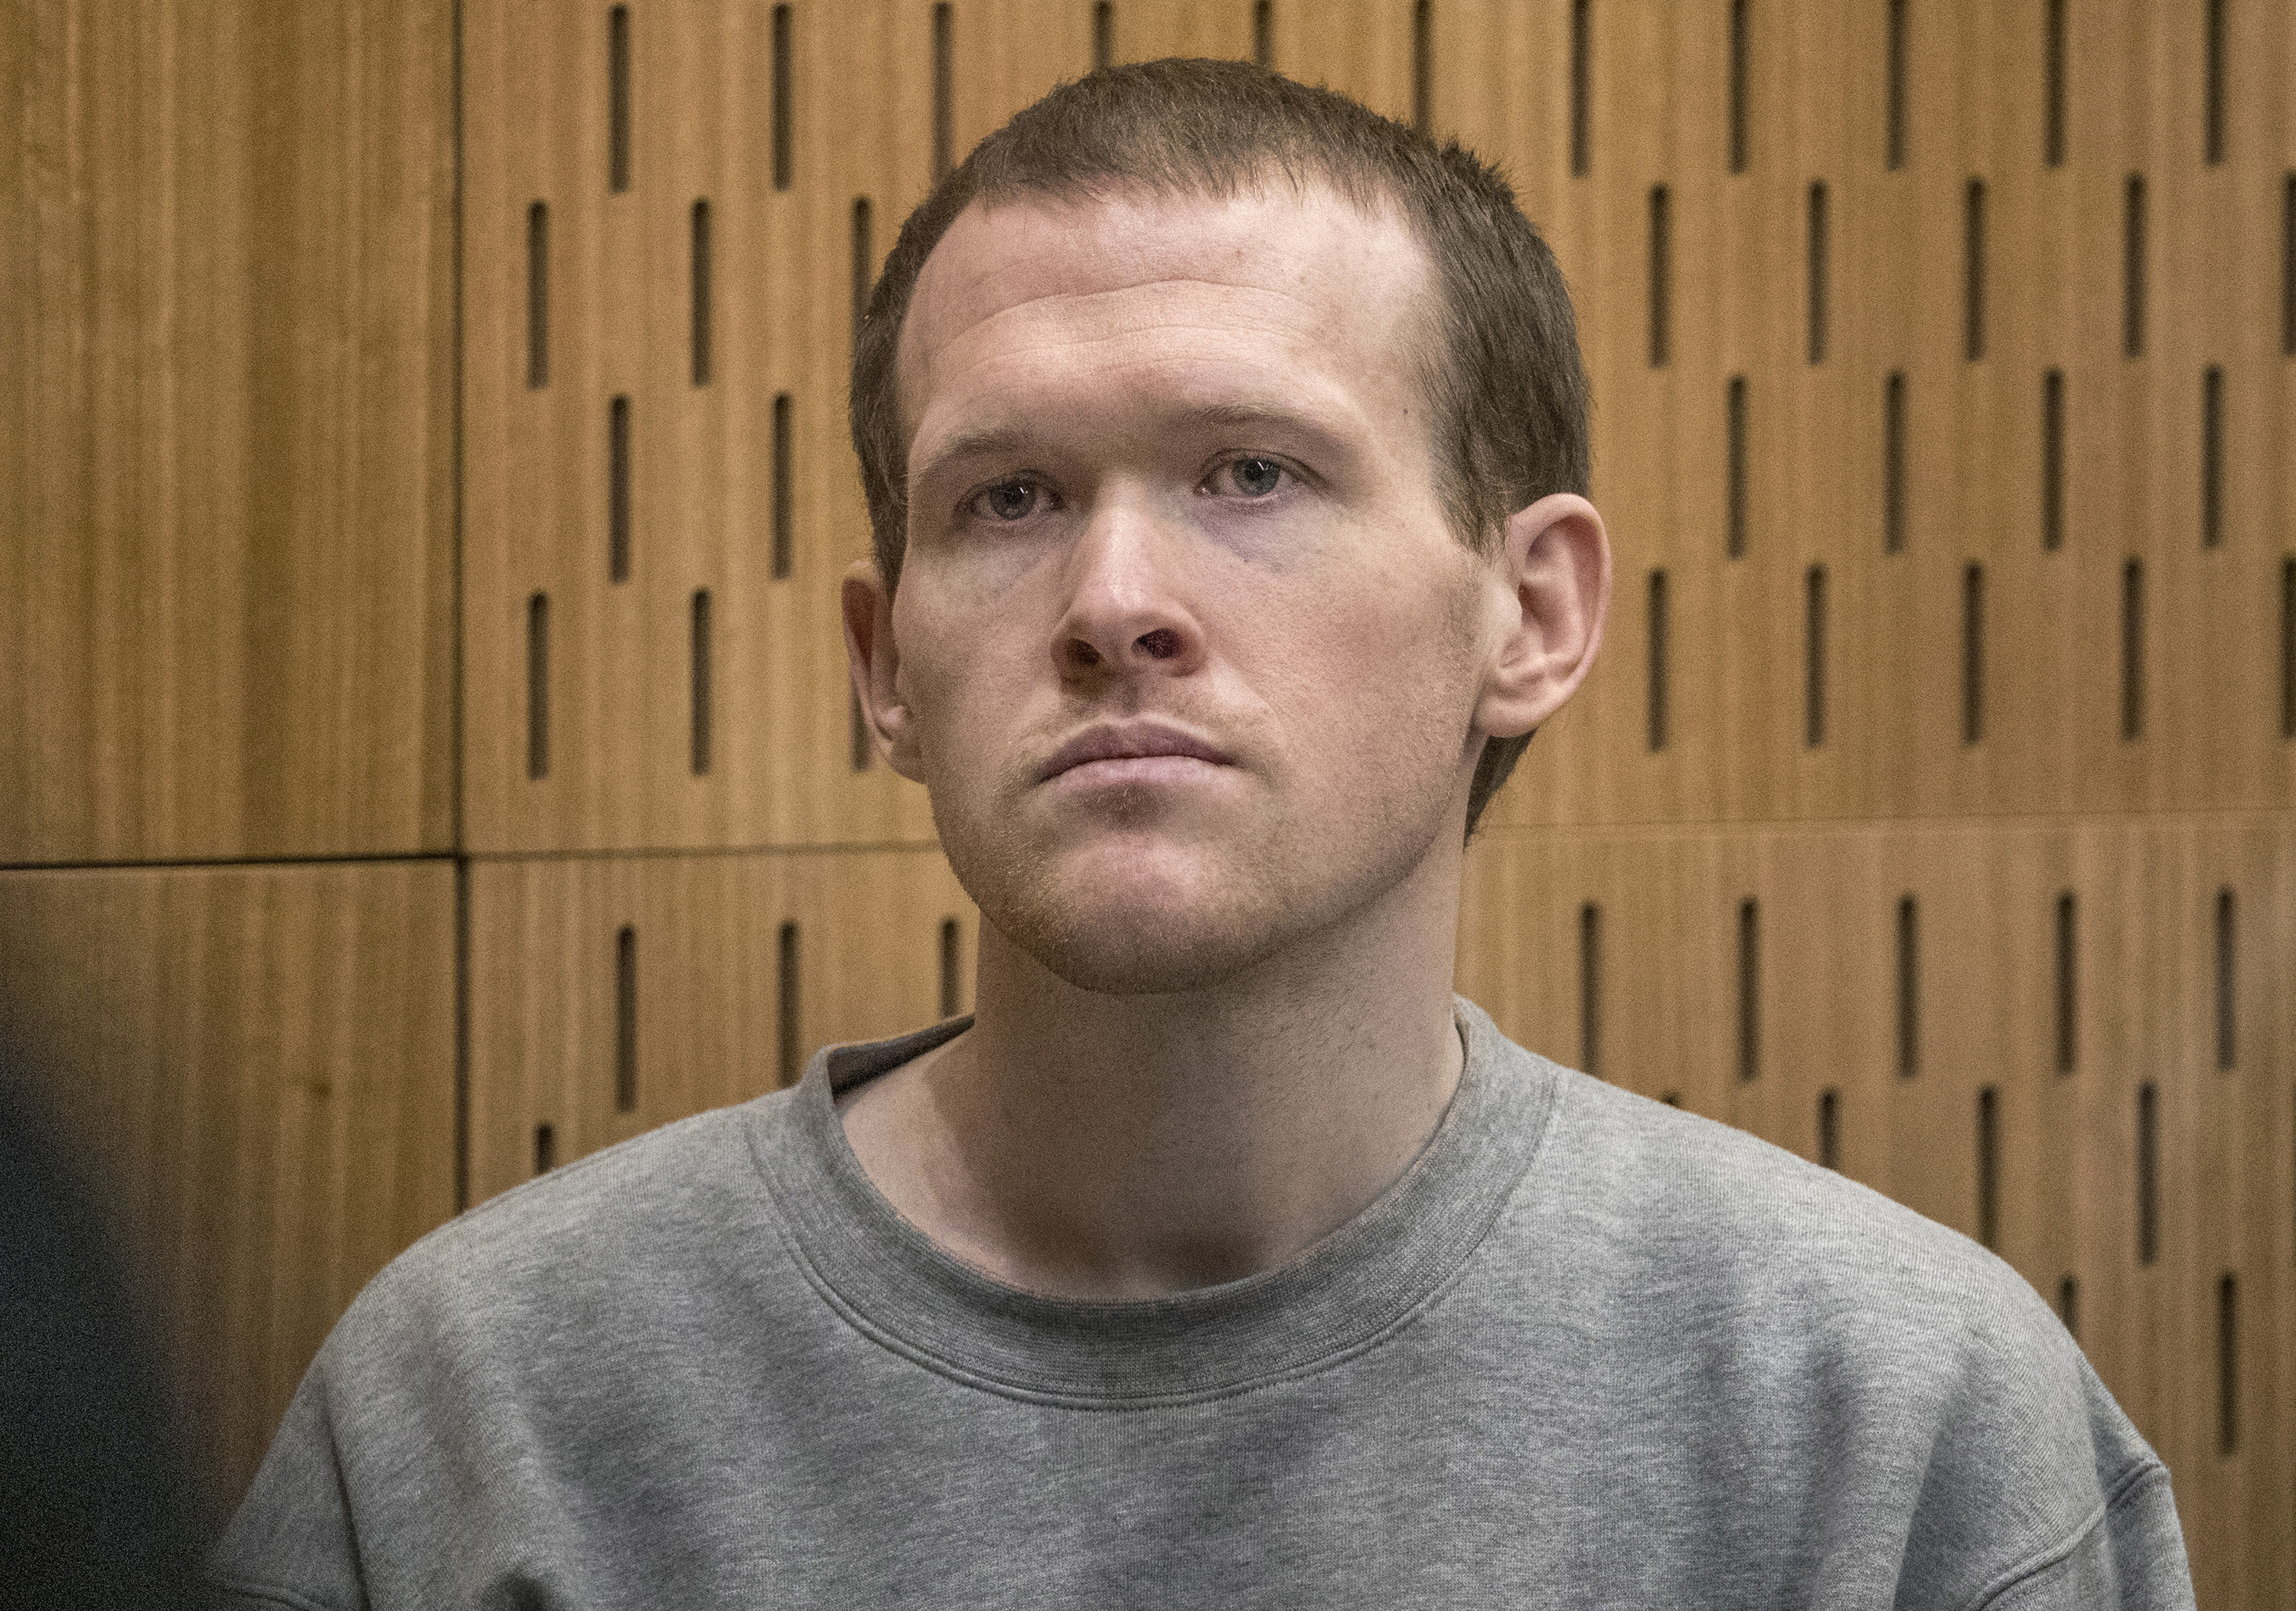  Brenton Tarrant has been sentenced to life imprisonment without parole